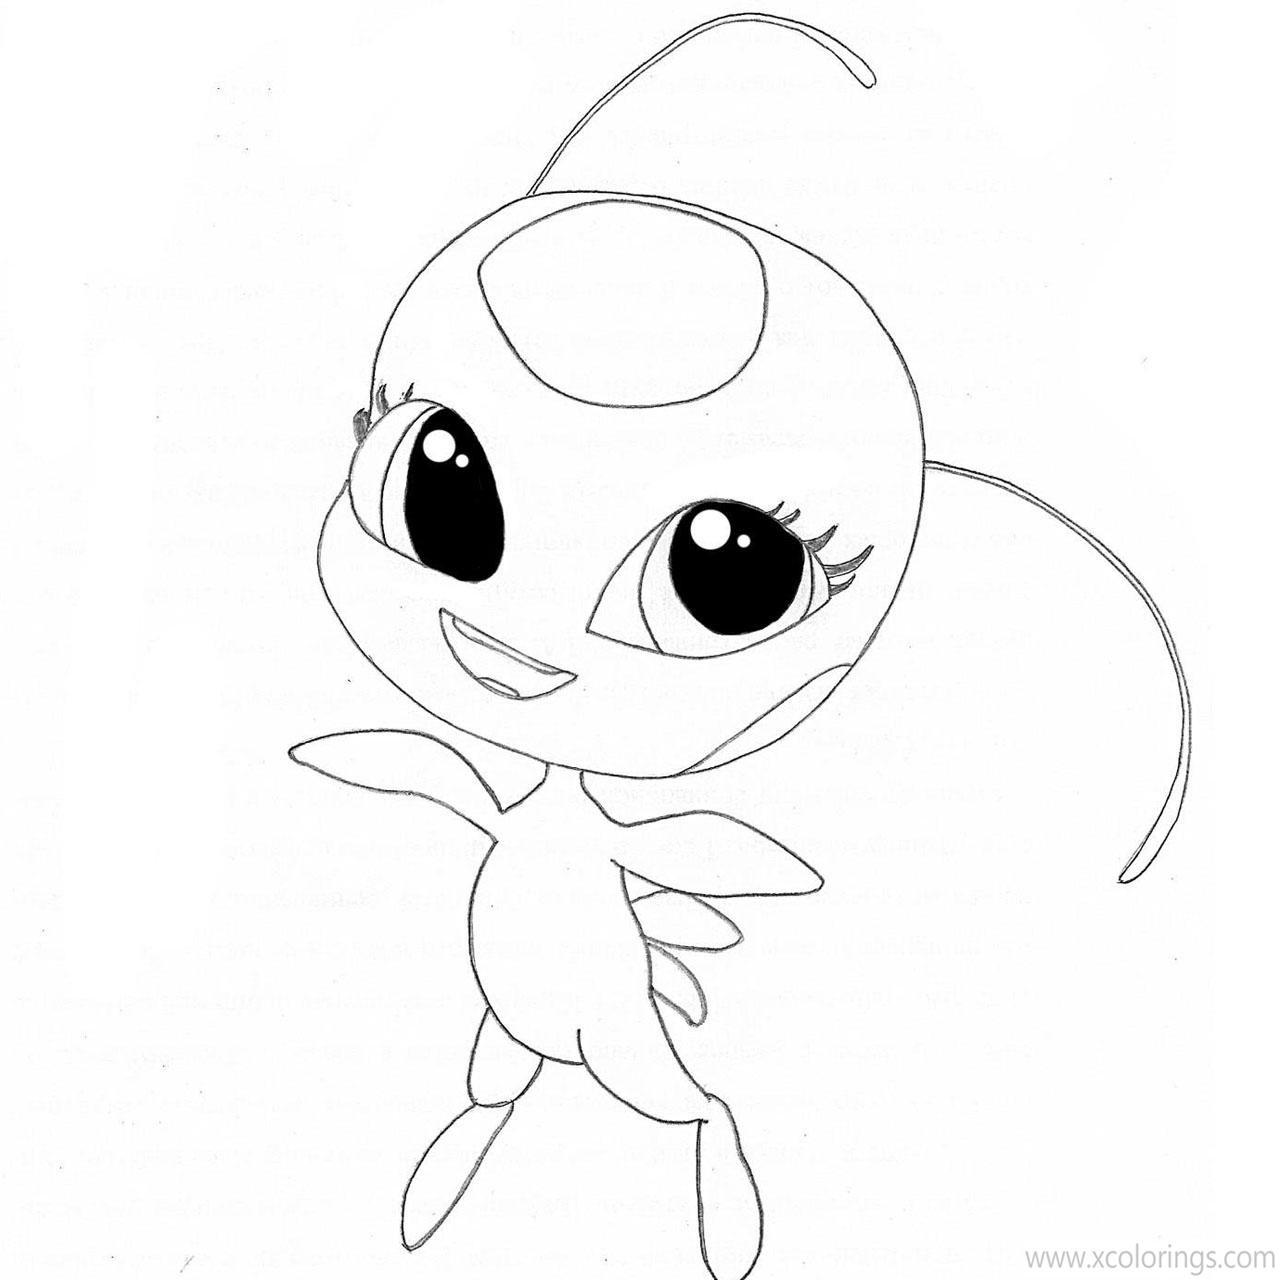 Free Tikki from Miraculous Ladybug and Cat Noir Coloring Pages printable